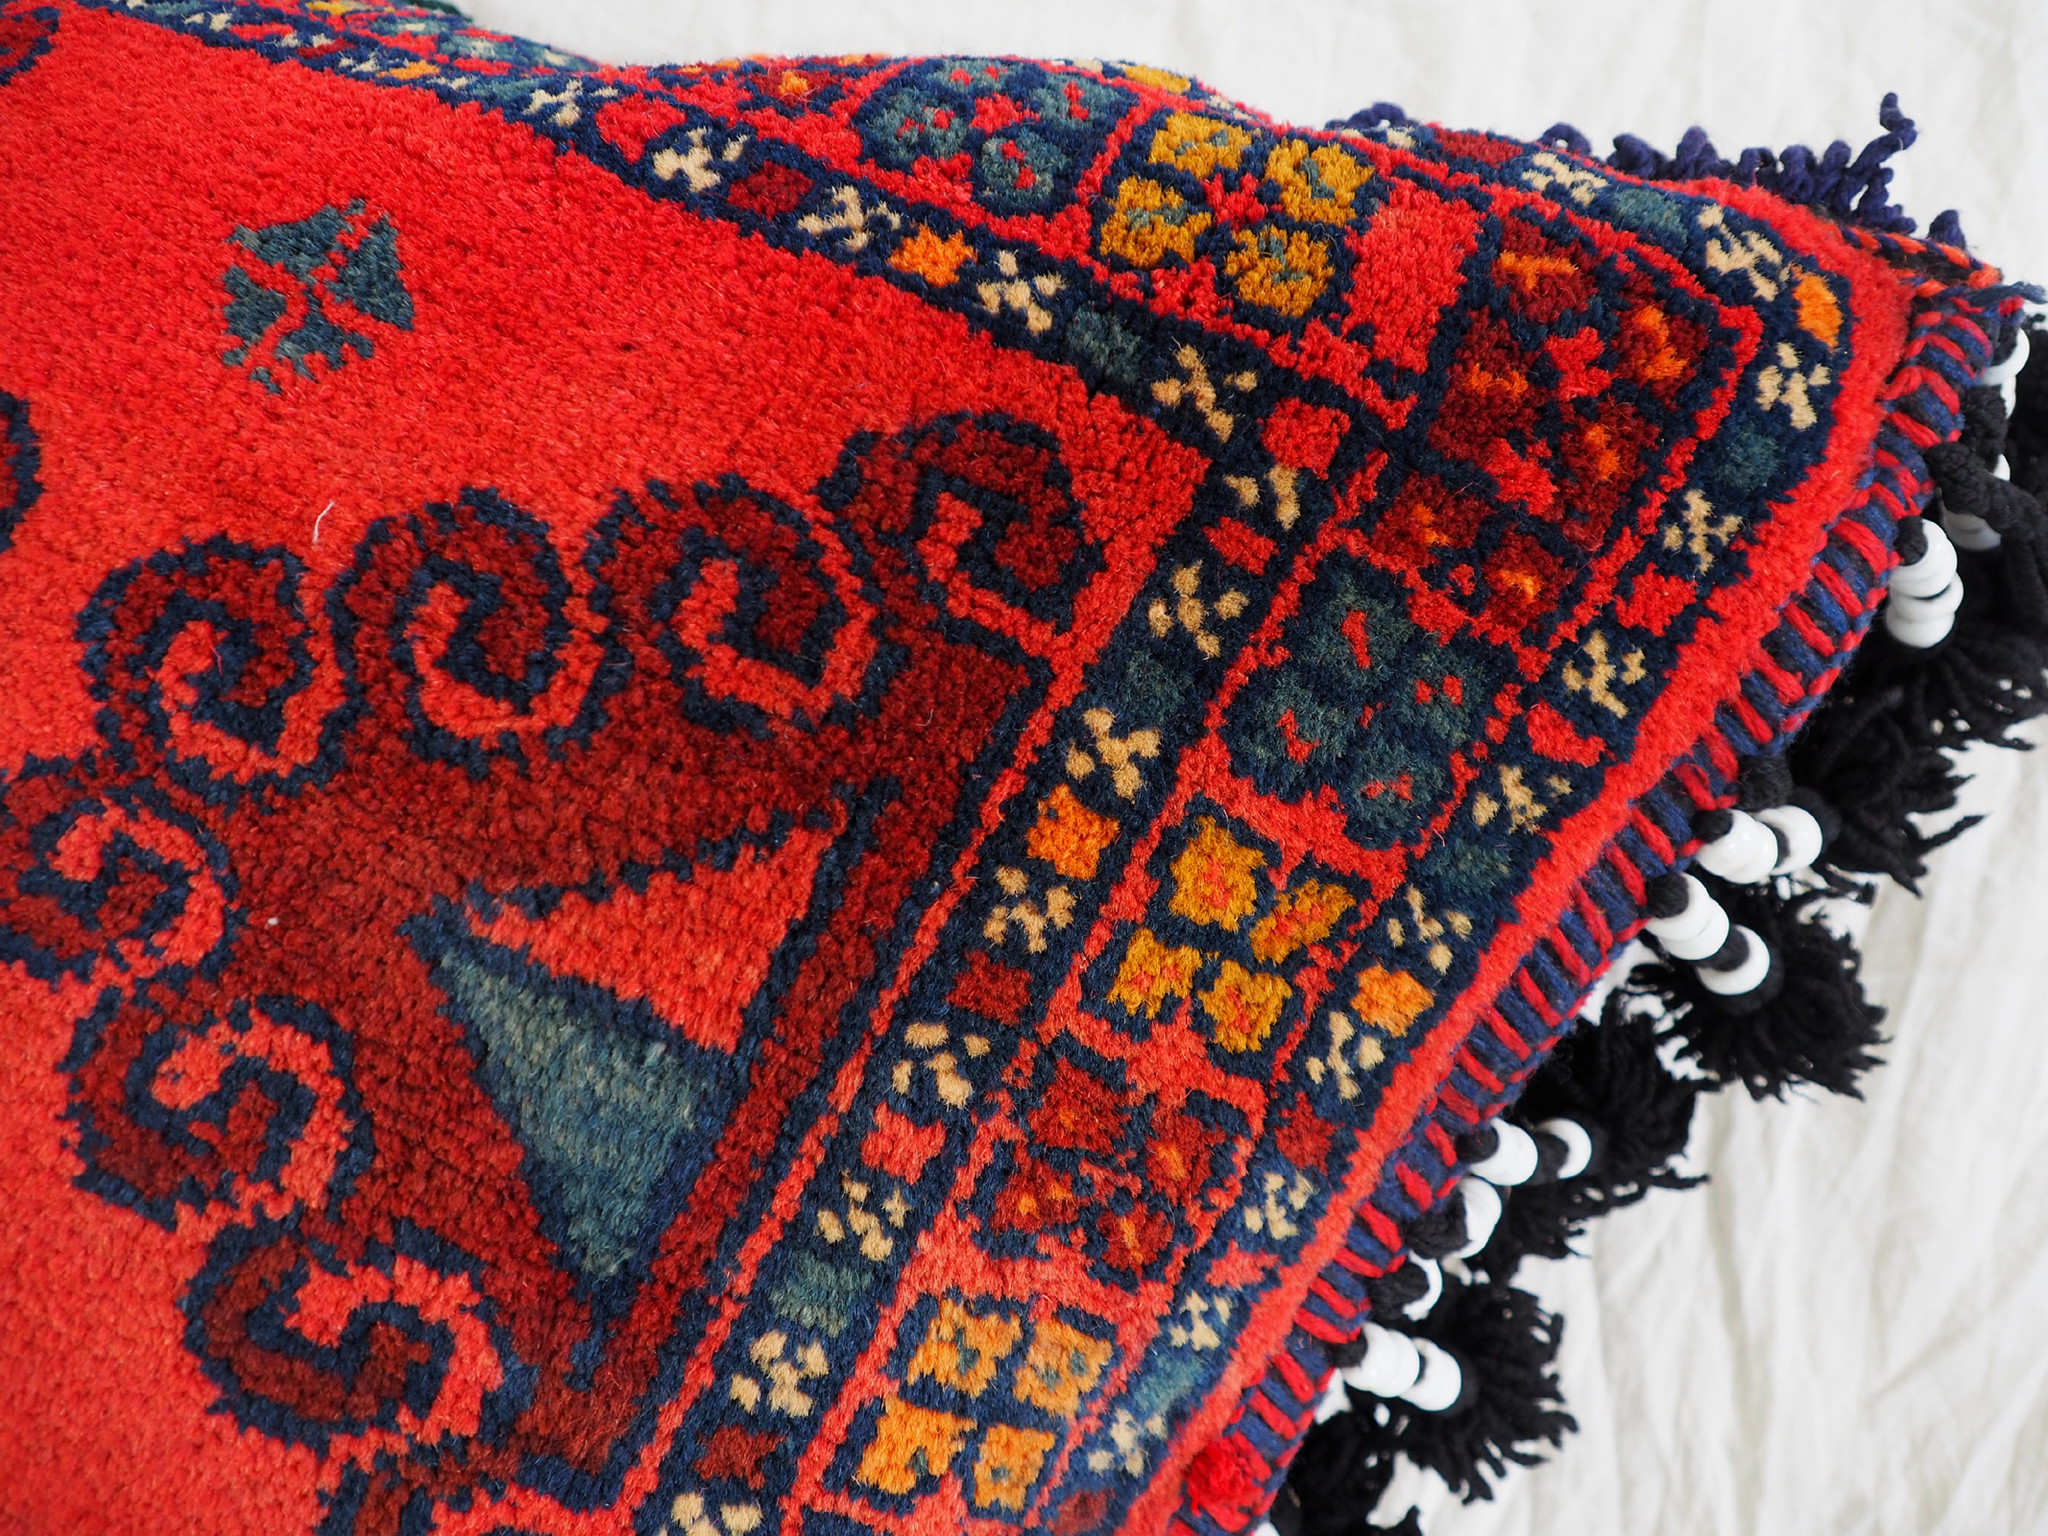 antique orient  Afghan Beloch nomad rug seat floor cushion Bohemian pillow 1001 night No:19/297